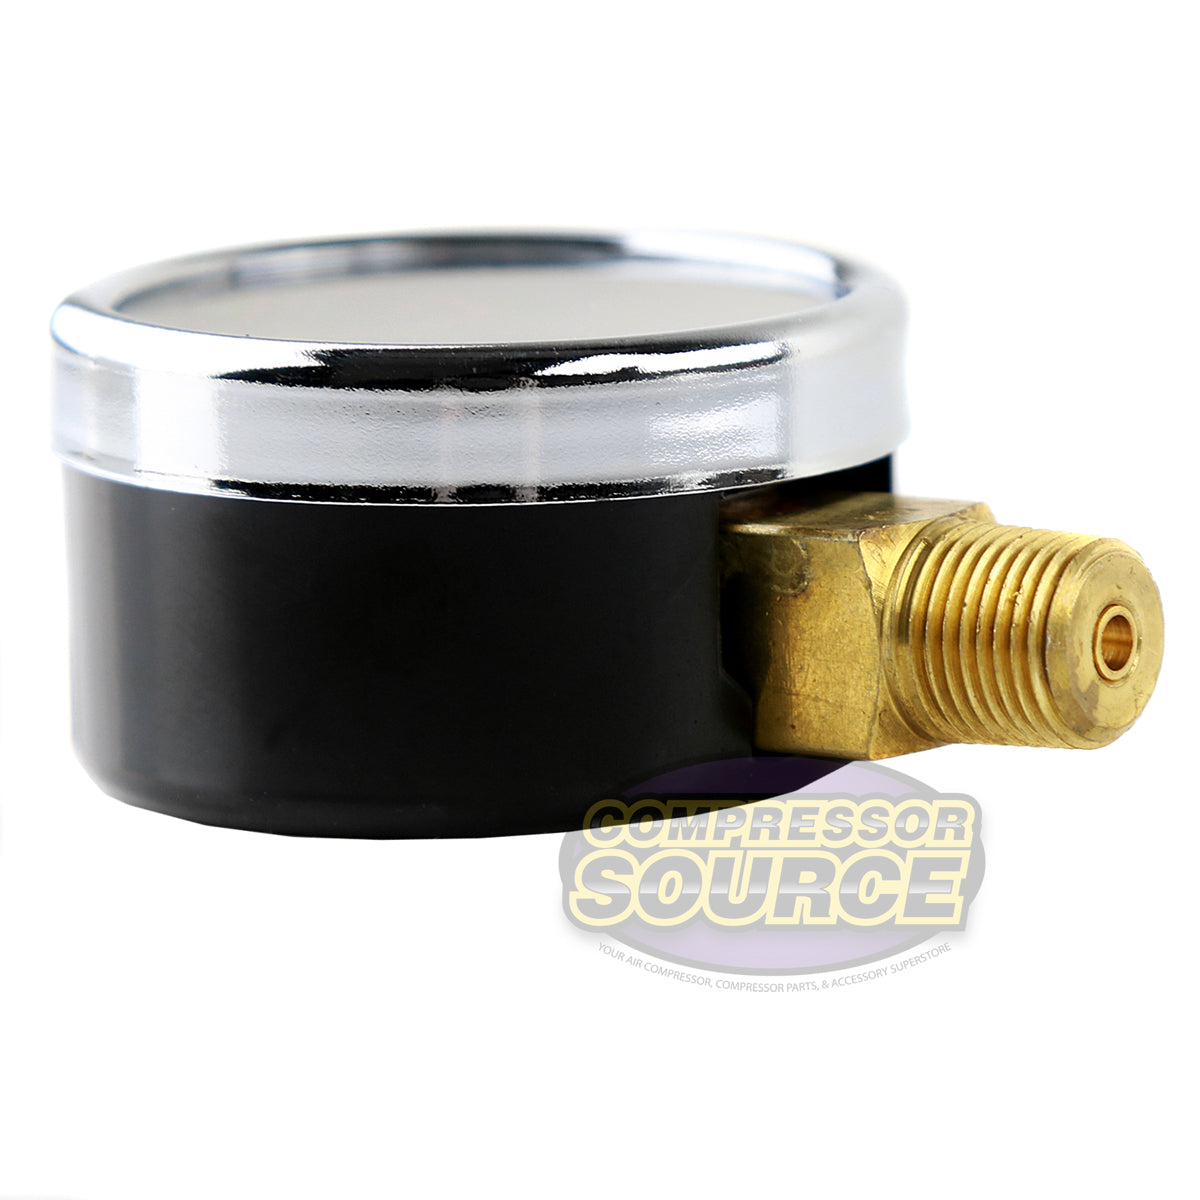 1/8" NPT 0-160 PSI Air Pressure Gauge Lower Side Mount with 1.5" Face